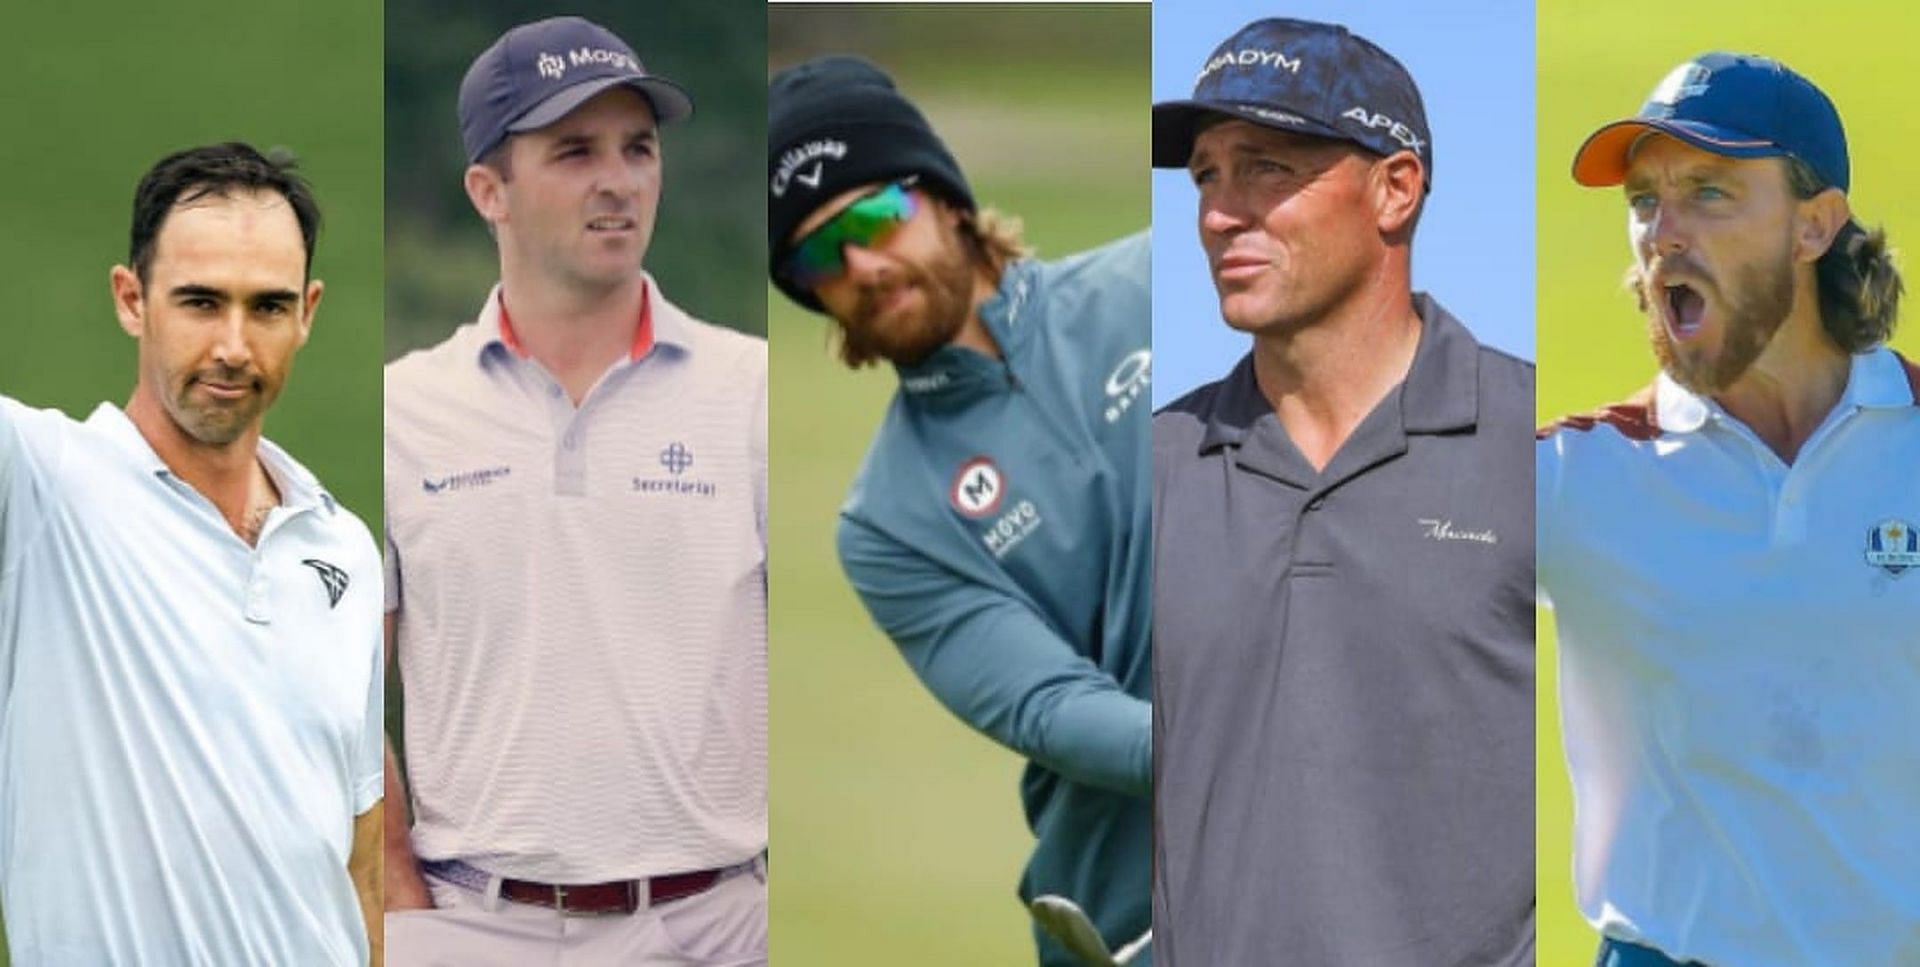 golfers who earned more than $10 million without winning a PGA Tour event